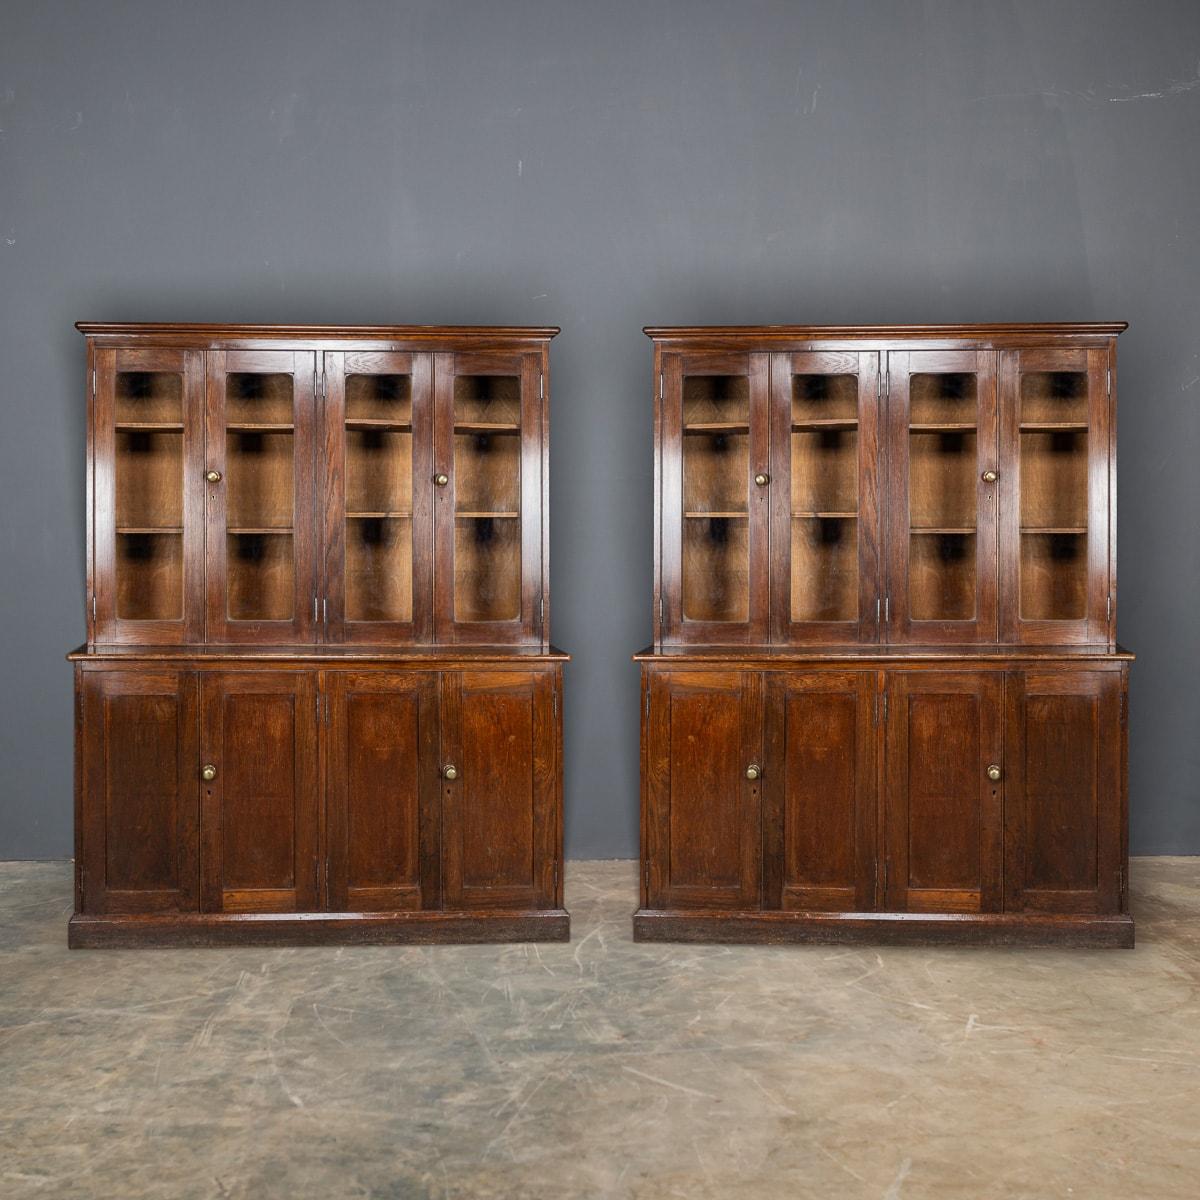 Antique early 20th Century delightful English oak and glass fronted bookcases / cabinets, featuring closed cupboard bases. Adorned with original brass handles, these cabinets exude timeless elegance. Whether for a home library or as furniture for